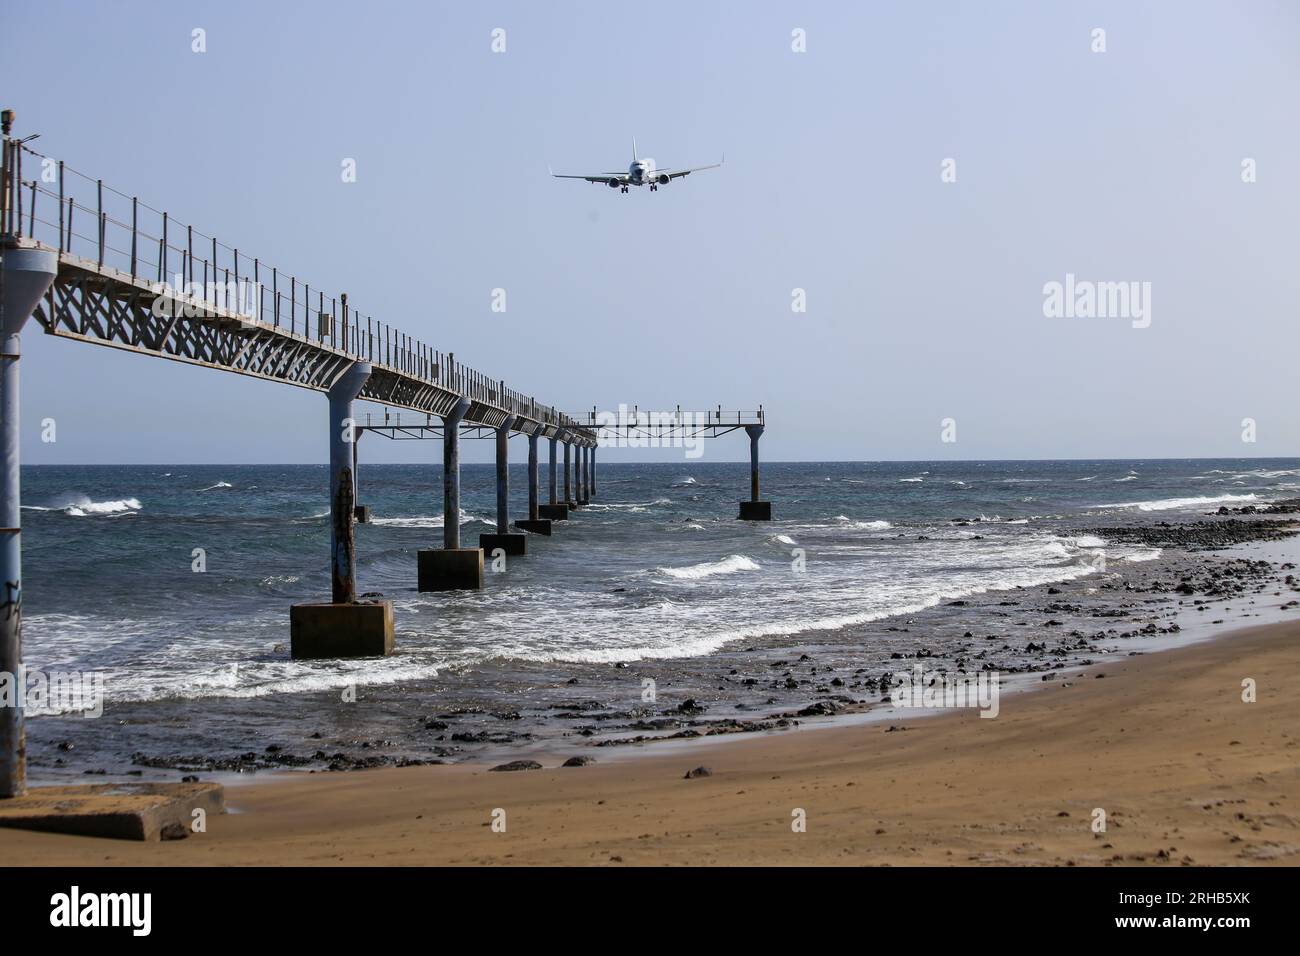 Tías, Spain, 15th August, 2023: A Transavia plane flies over Lima Beach before landing at Lanzarote Airport during daily day in Lanzarote, Spain, on August 15, 2023. Credit: Alberto Brevers / Alamy Live News. Stock Photo